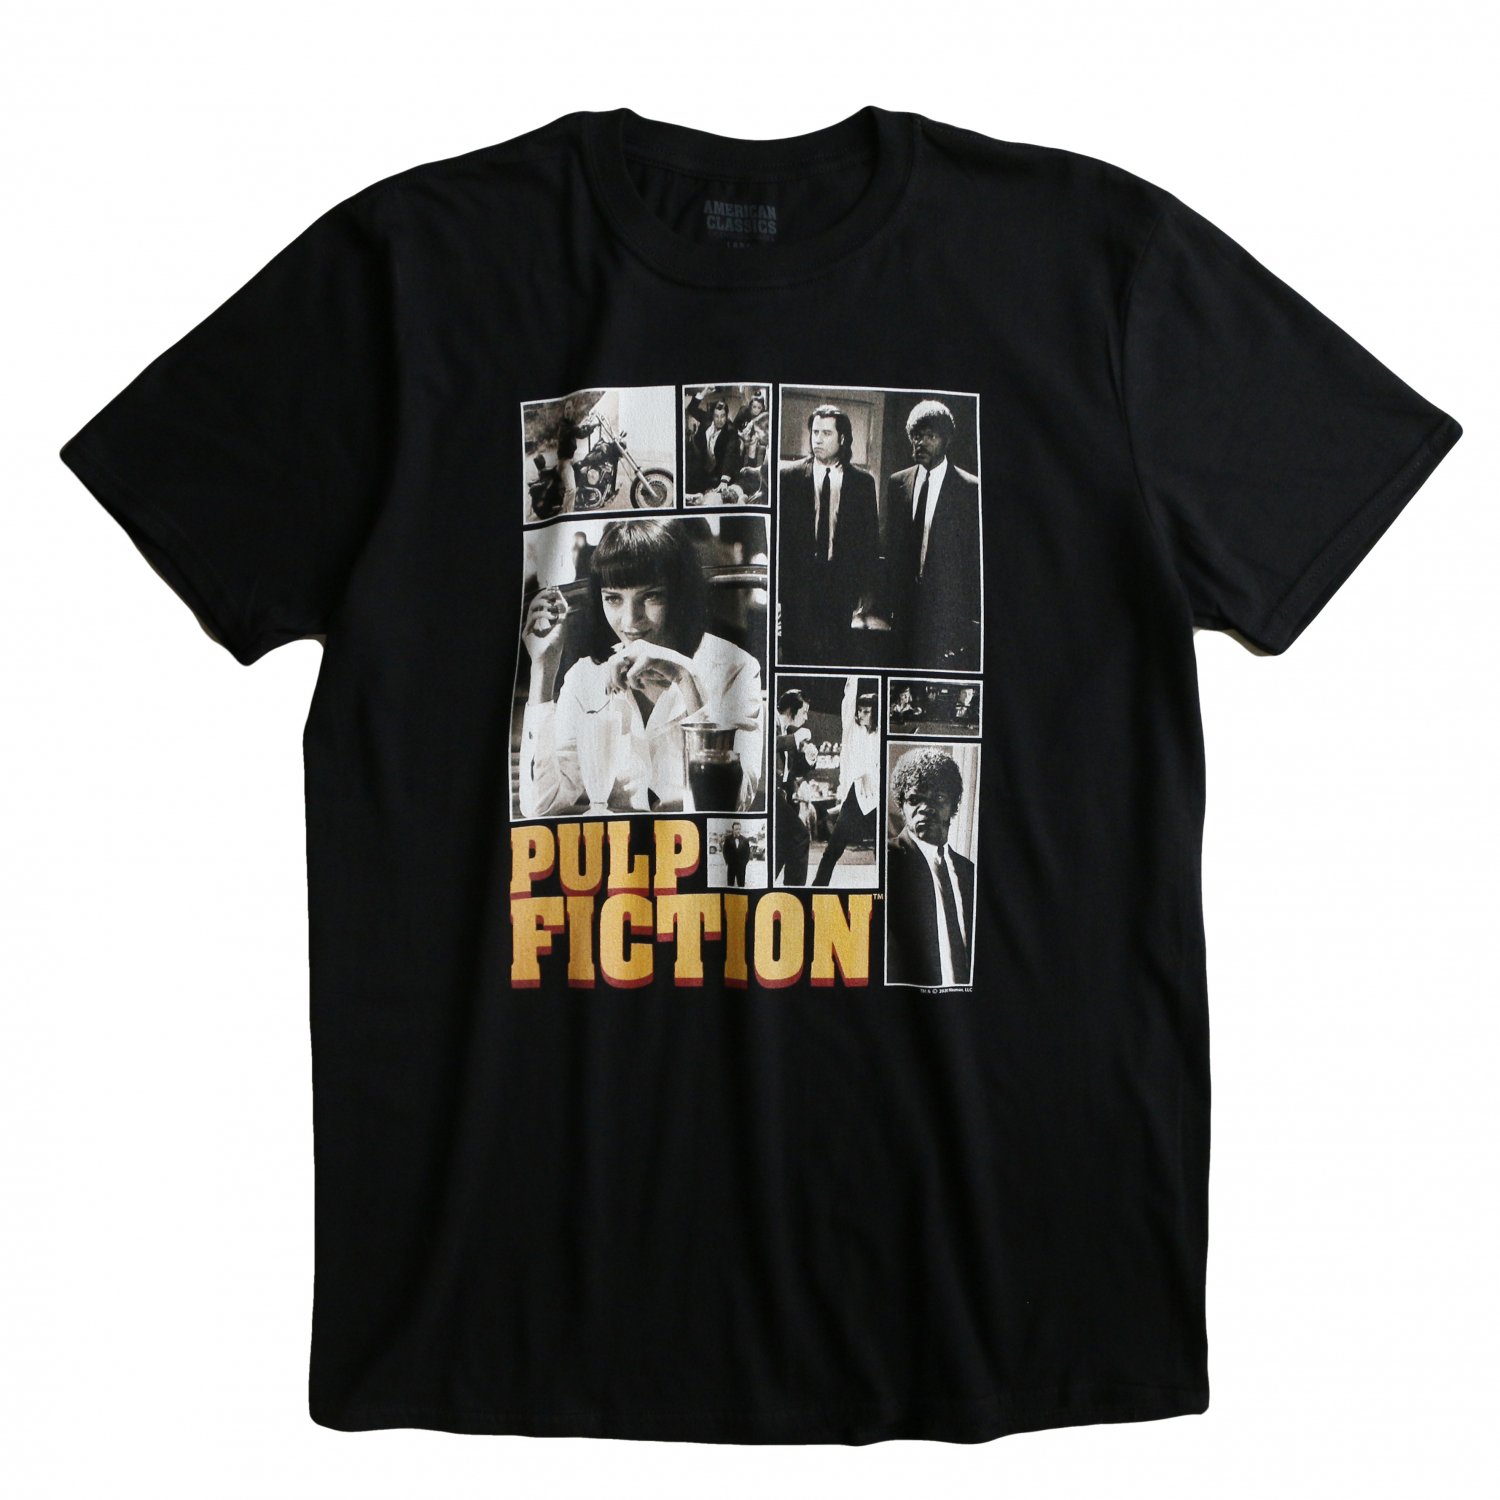 <img class='new_mark_img1' src='https://img.shop-pro.jp/img/new/icons8.gif' style='border:none;display:inline;margin:0px;padding:0px;width:auto;' />Movie Tee / S/S TEE PULP FICTION